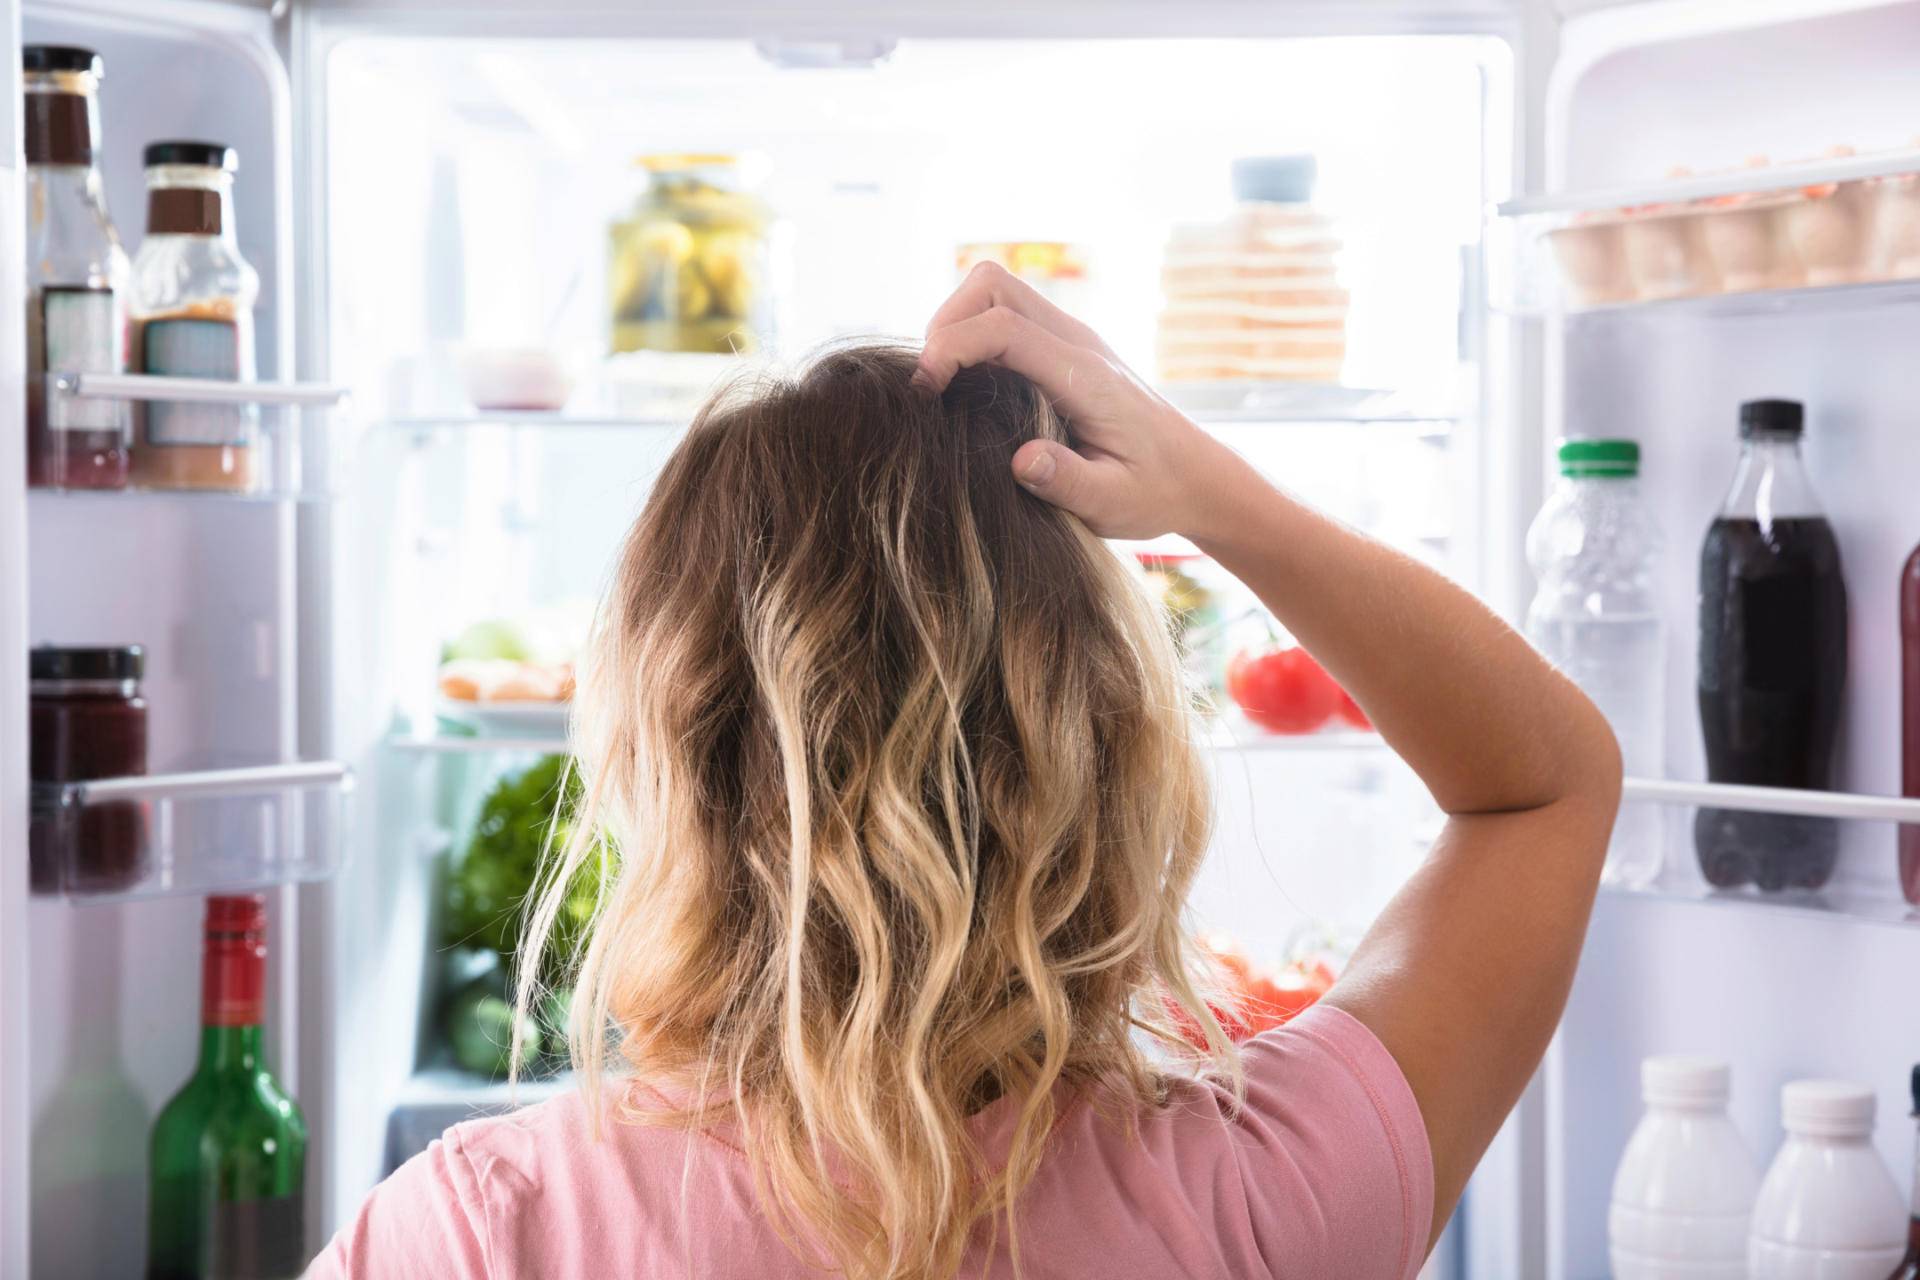 A woman stands in front of an open fridge, scratching her head